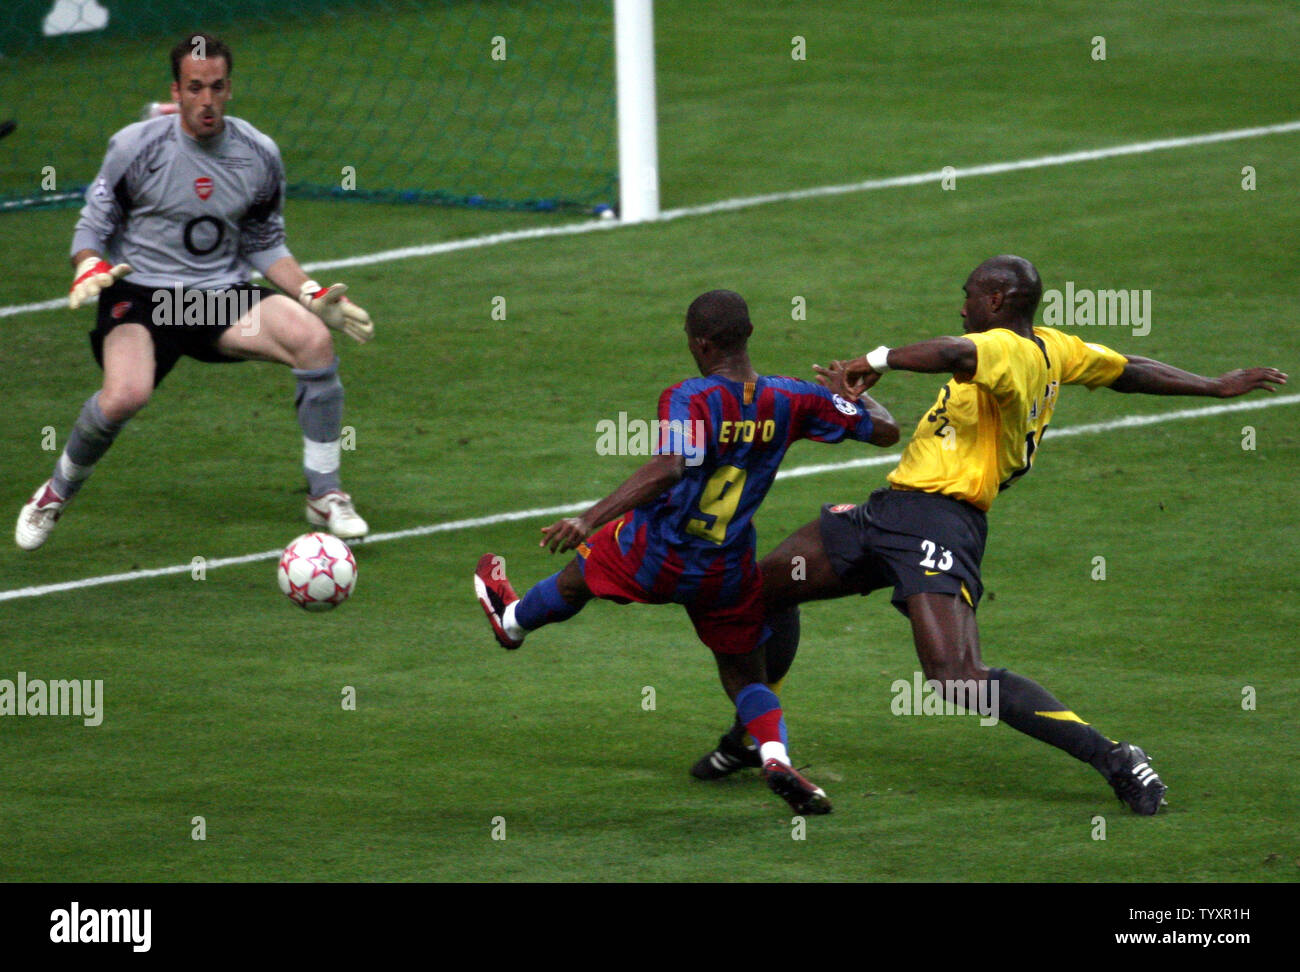 FC Barcelona tries to score against Arsenal FC goalkeeper Manuel Almunia as teammate Sol Campbell tries to stop him during their UEFA Champions League soccer final at the Stade de France in Saint Denis, near Paris, May 17, 2006. Barcelona won 2-1. (UPI Photo/Eco Clement) Stock Photo